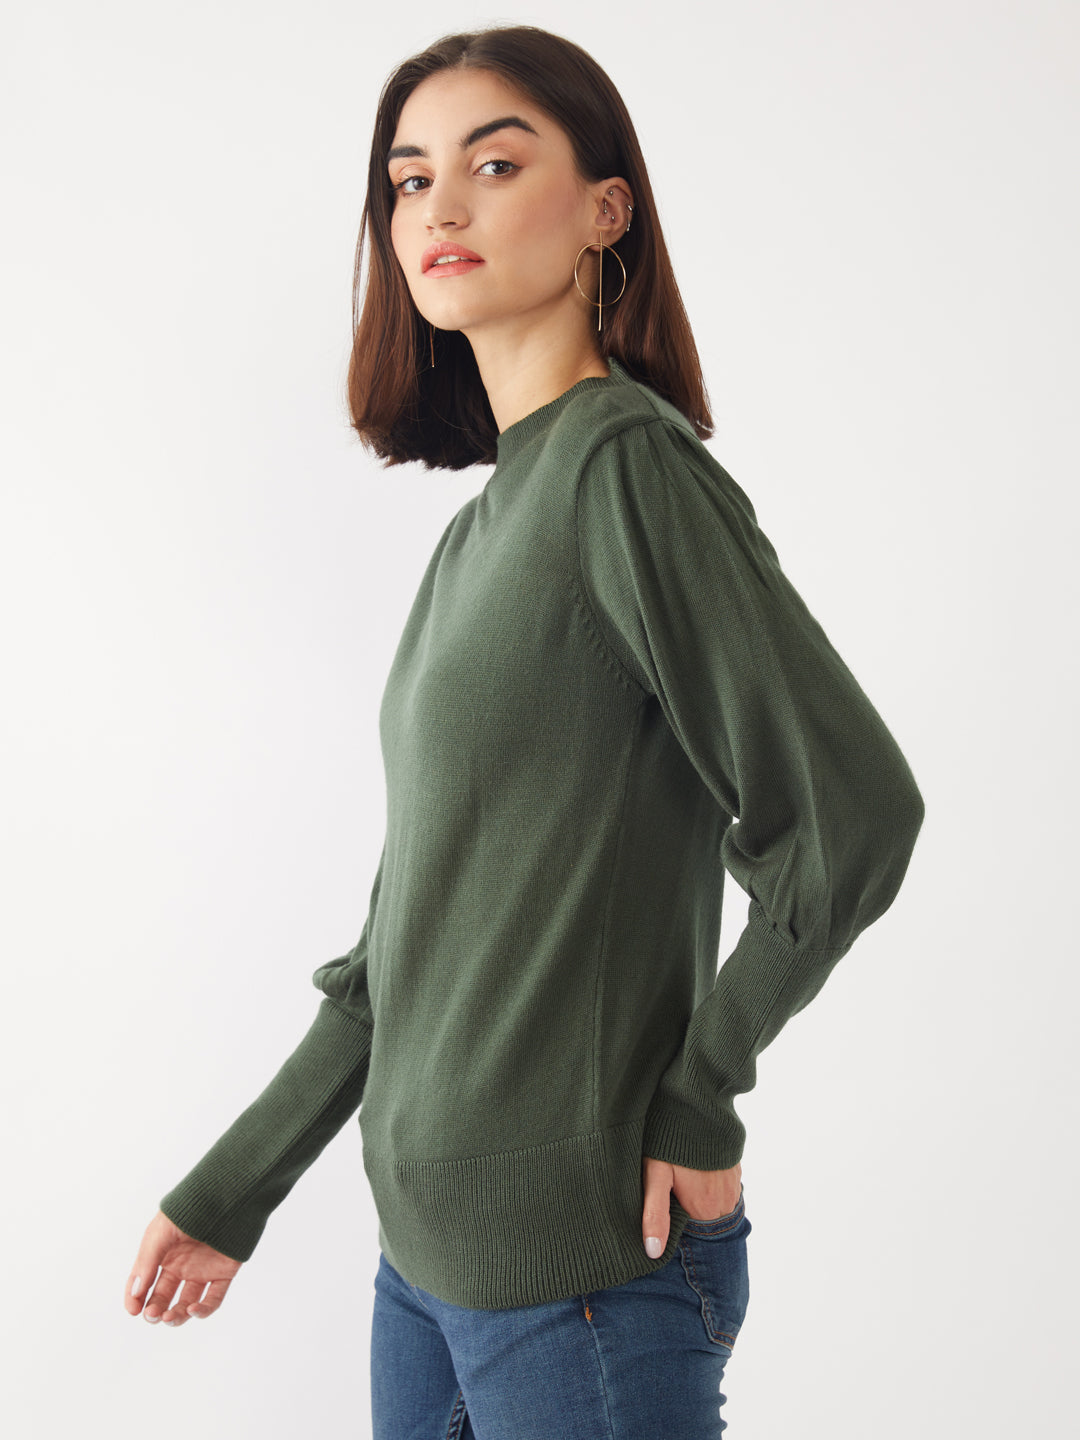 Green Solid Sweater For Women